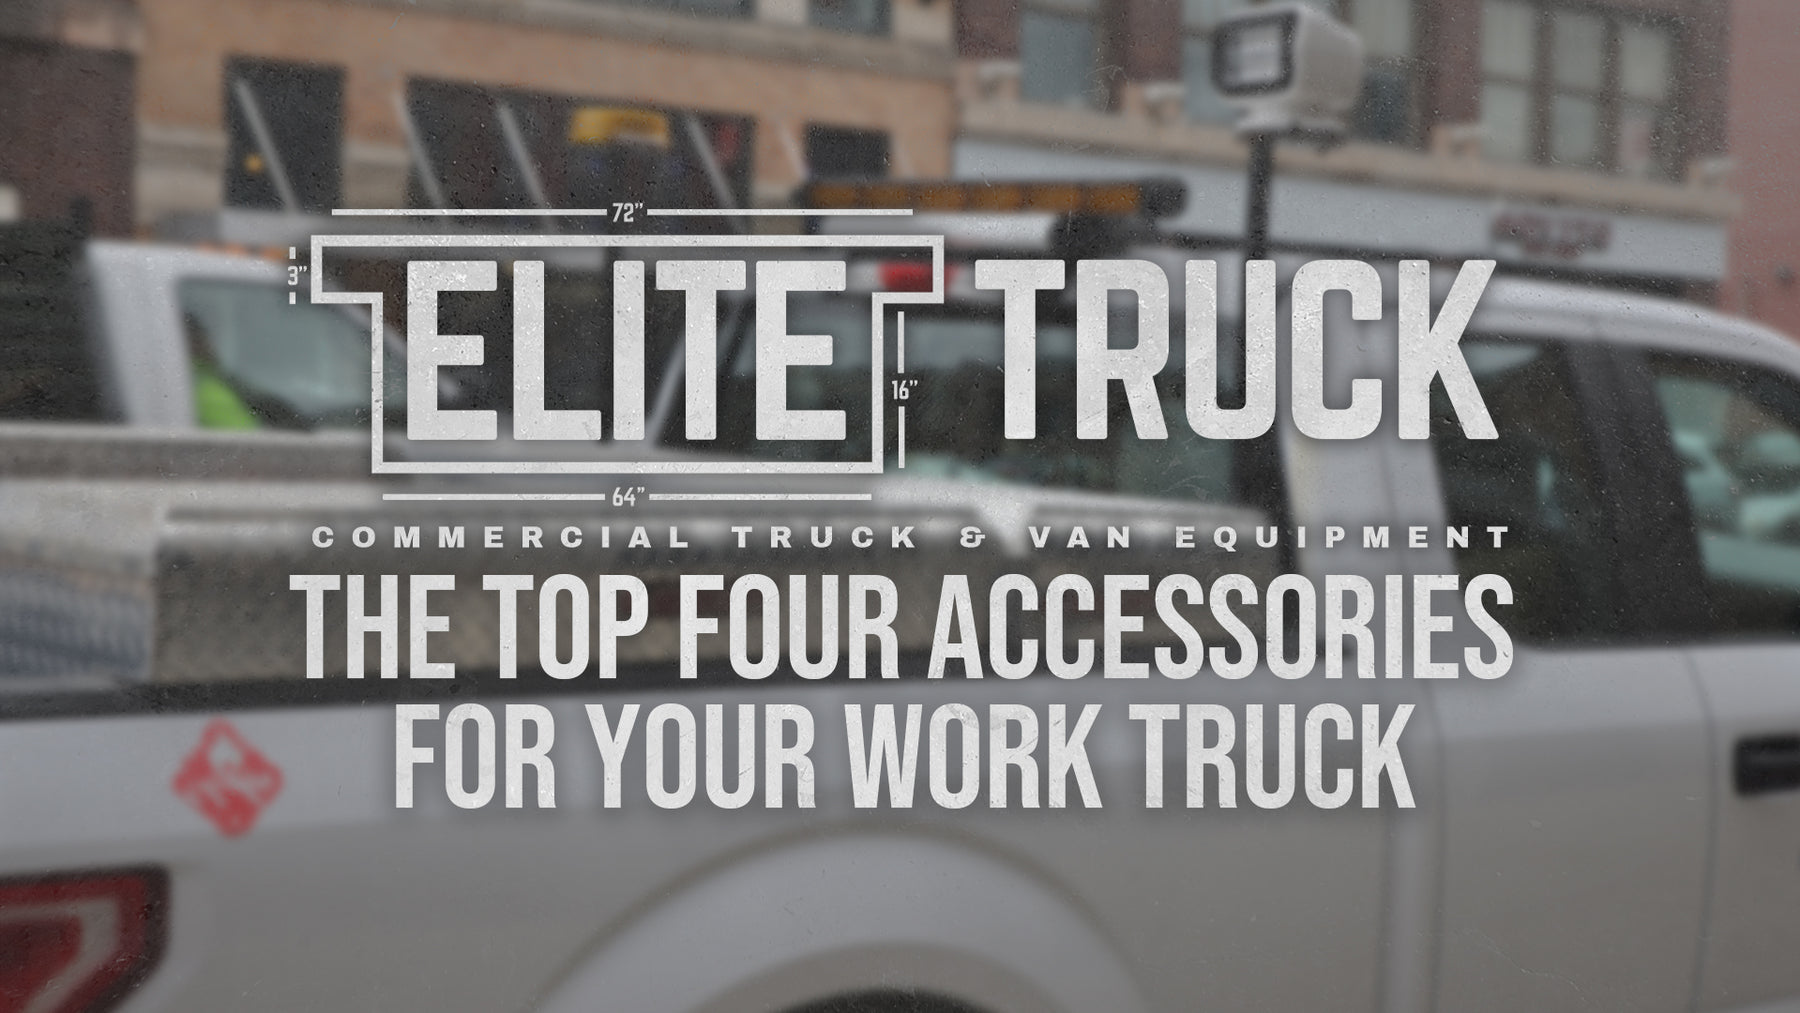 Top 4 Accessories For Your Work Truck